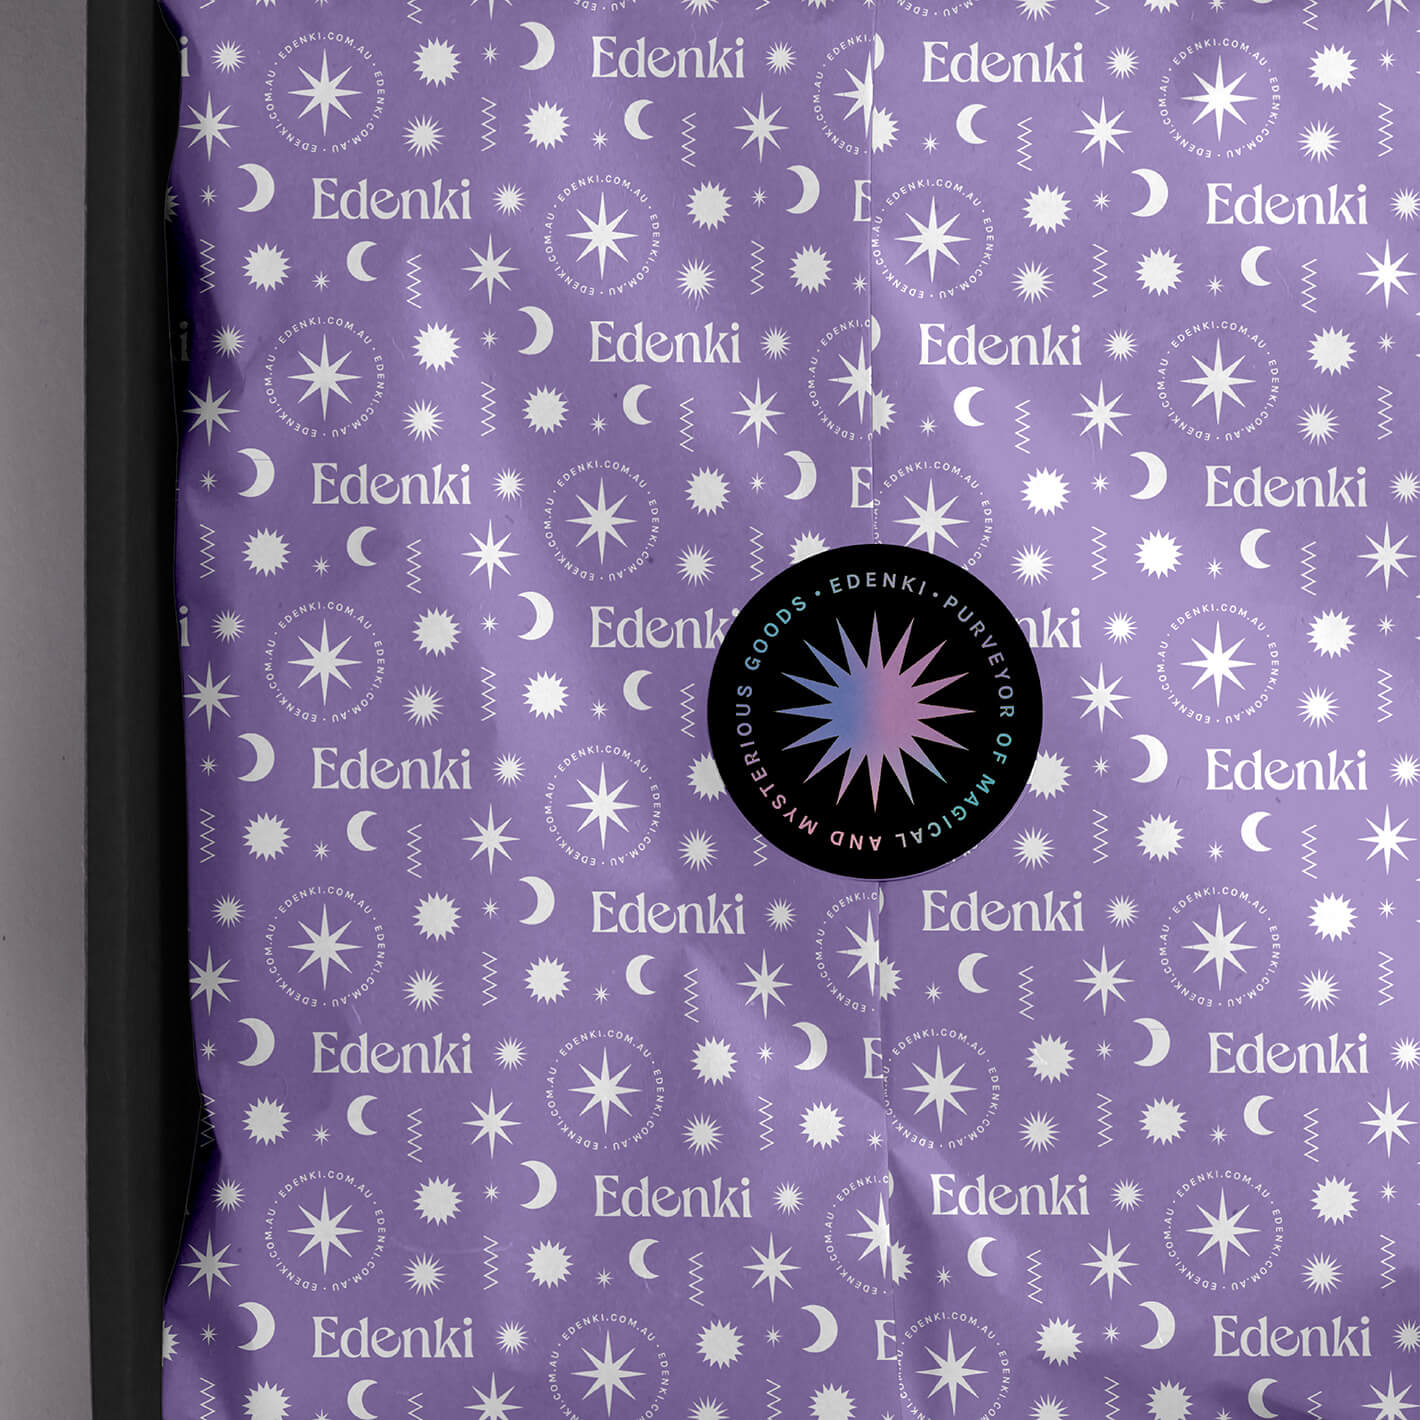 Brand identity case study image of the Edenki custom tissue paper in a box. The light purple design features the brand logo and supporting celestial icons in white with a black sticker with holographic foil sealing the package.